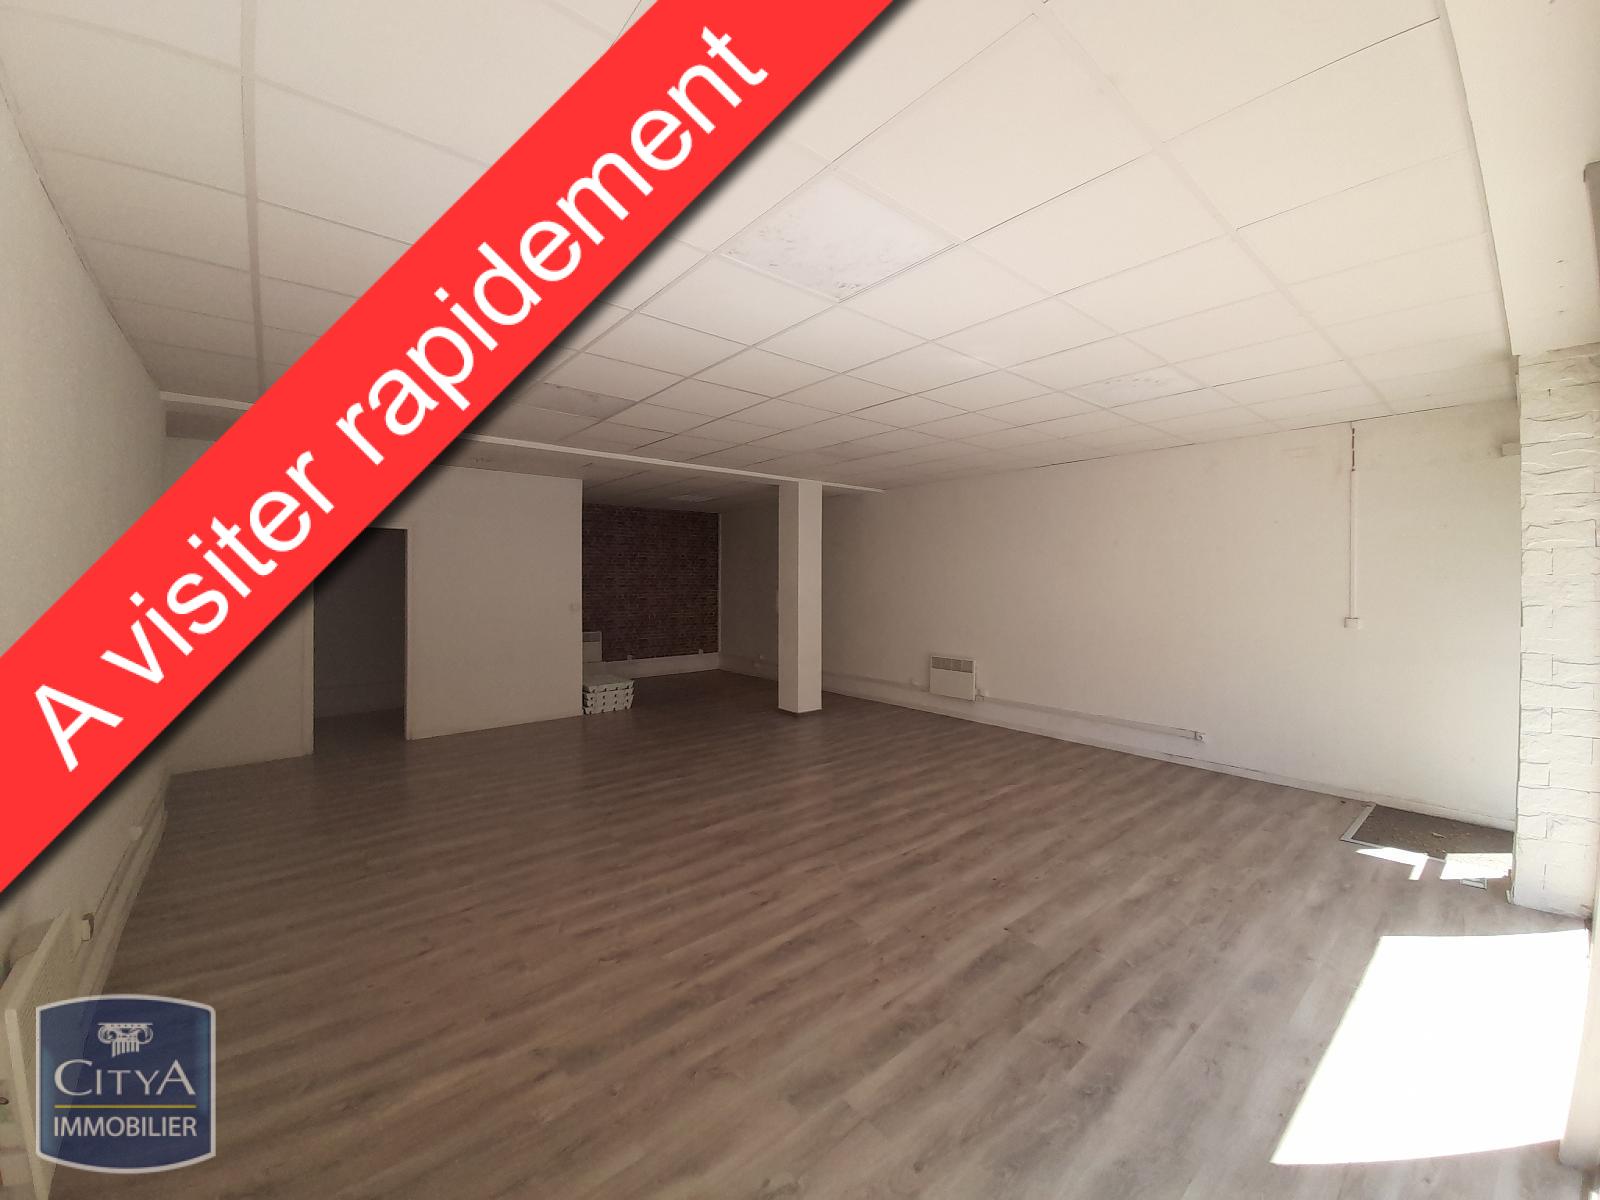 Photo Local Commercial 59.27m²